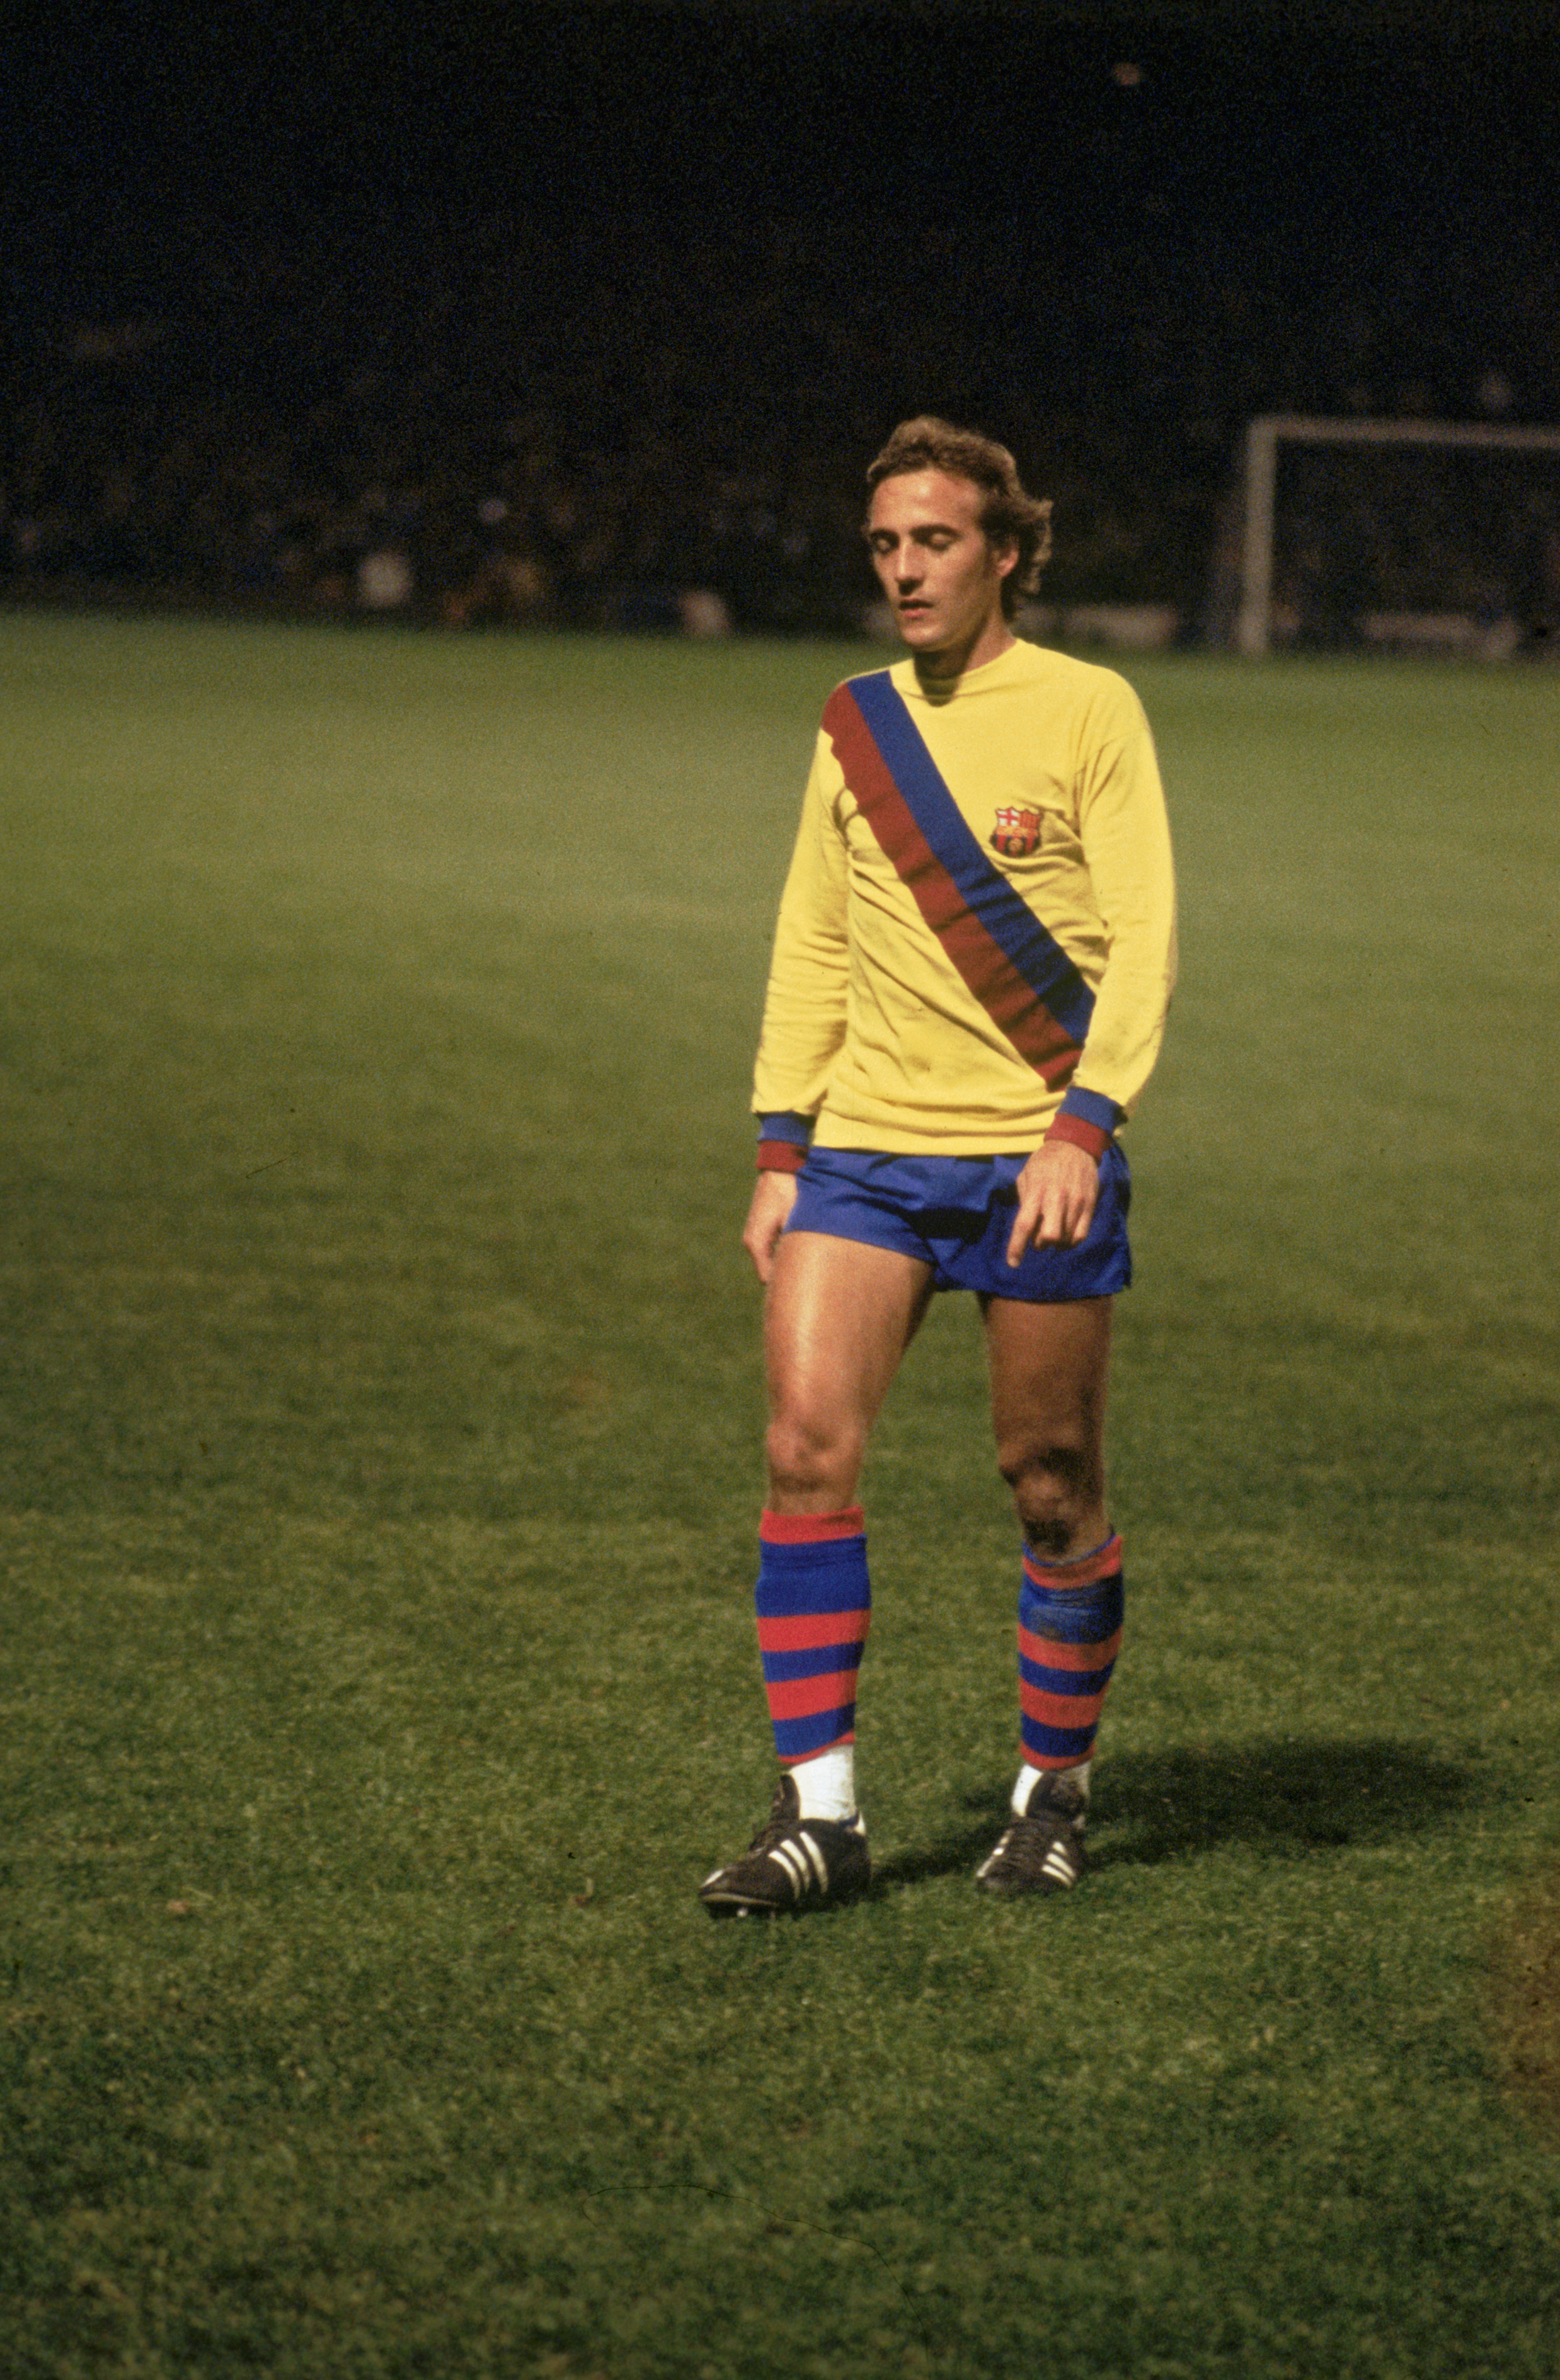 Dutch midfielder Johan Neeskens playing for Spanish club FC Barcelona, late 1970s. (Photo by Allsport/Getty Images)